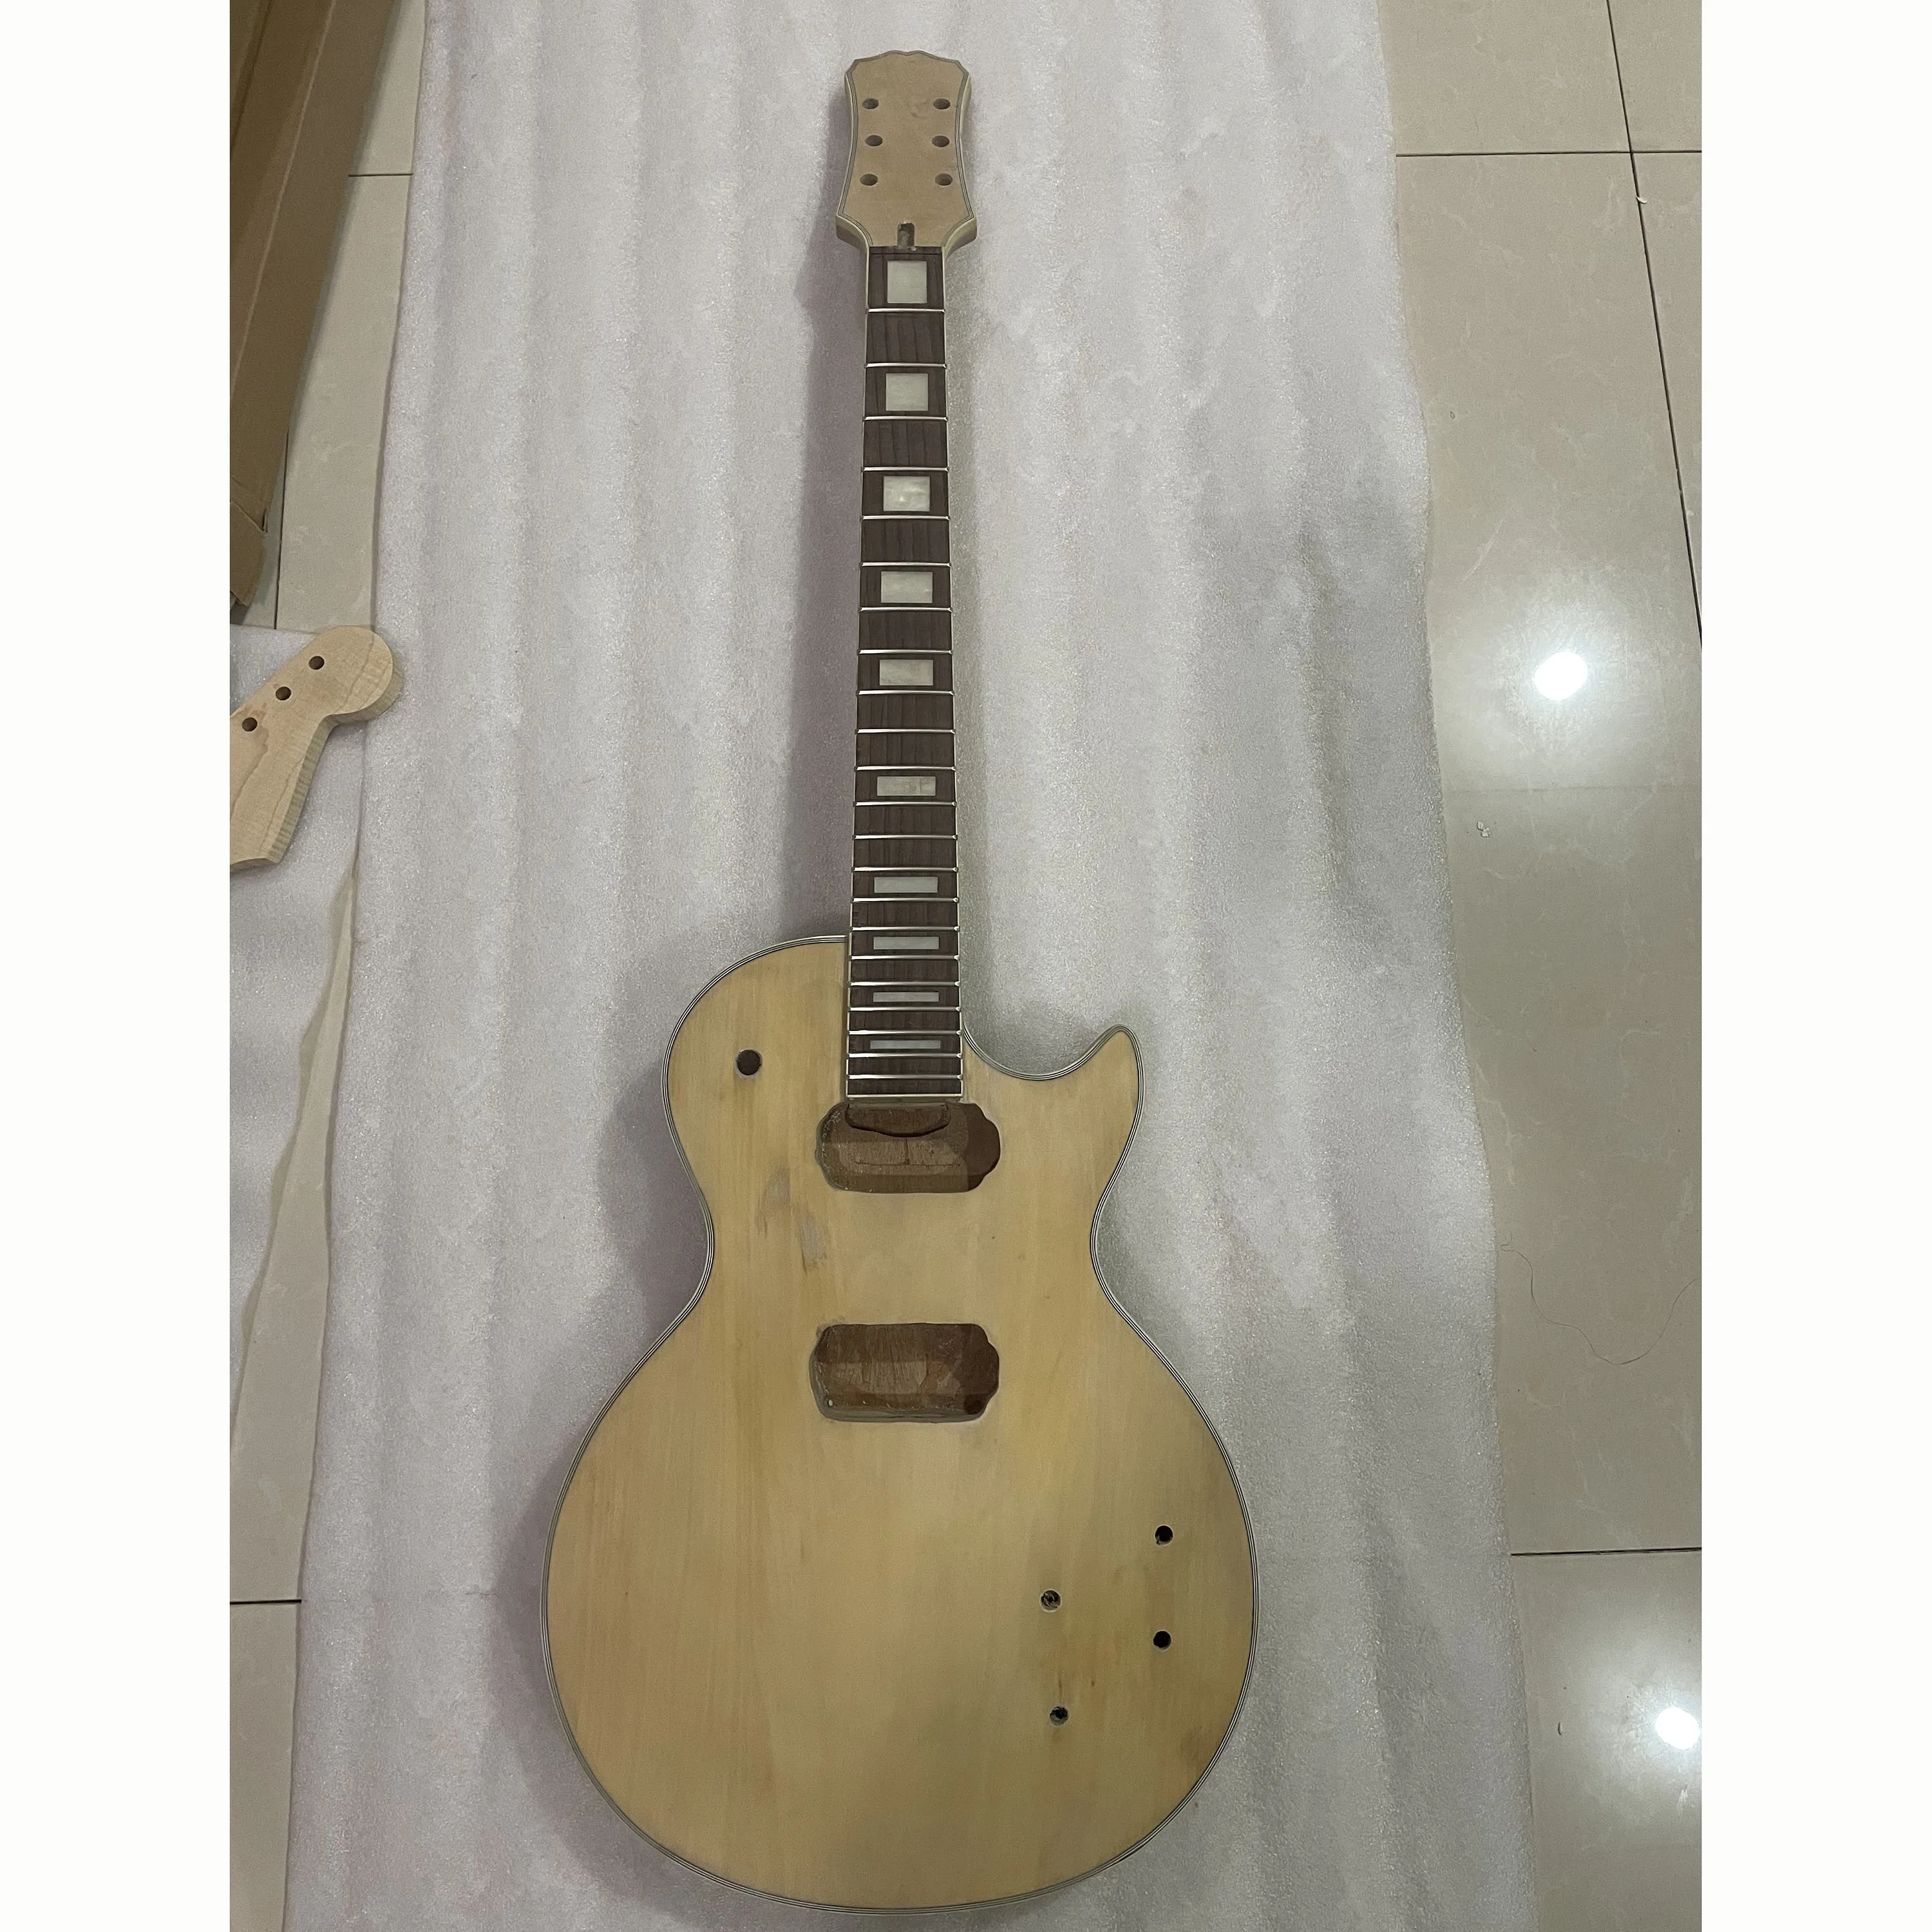 Unfinished DIY LP Gibson Style Electric Guitar Kit Replace Set for Luthier Lovers Semi-finished Guitar Kit Part Accessories enlarge